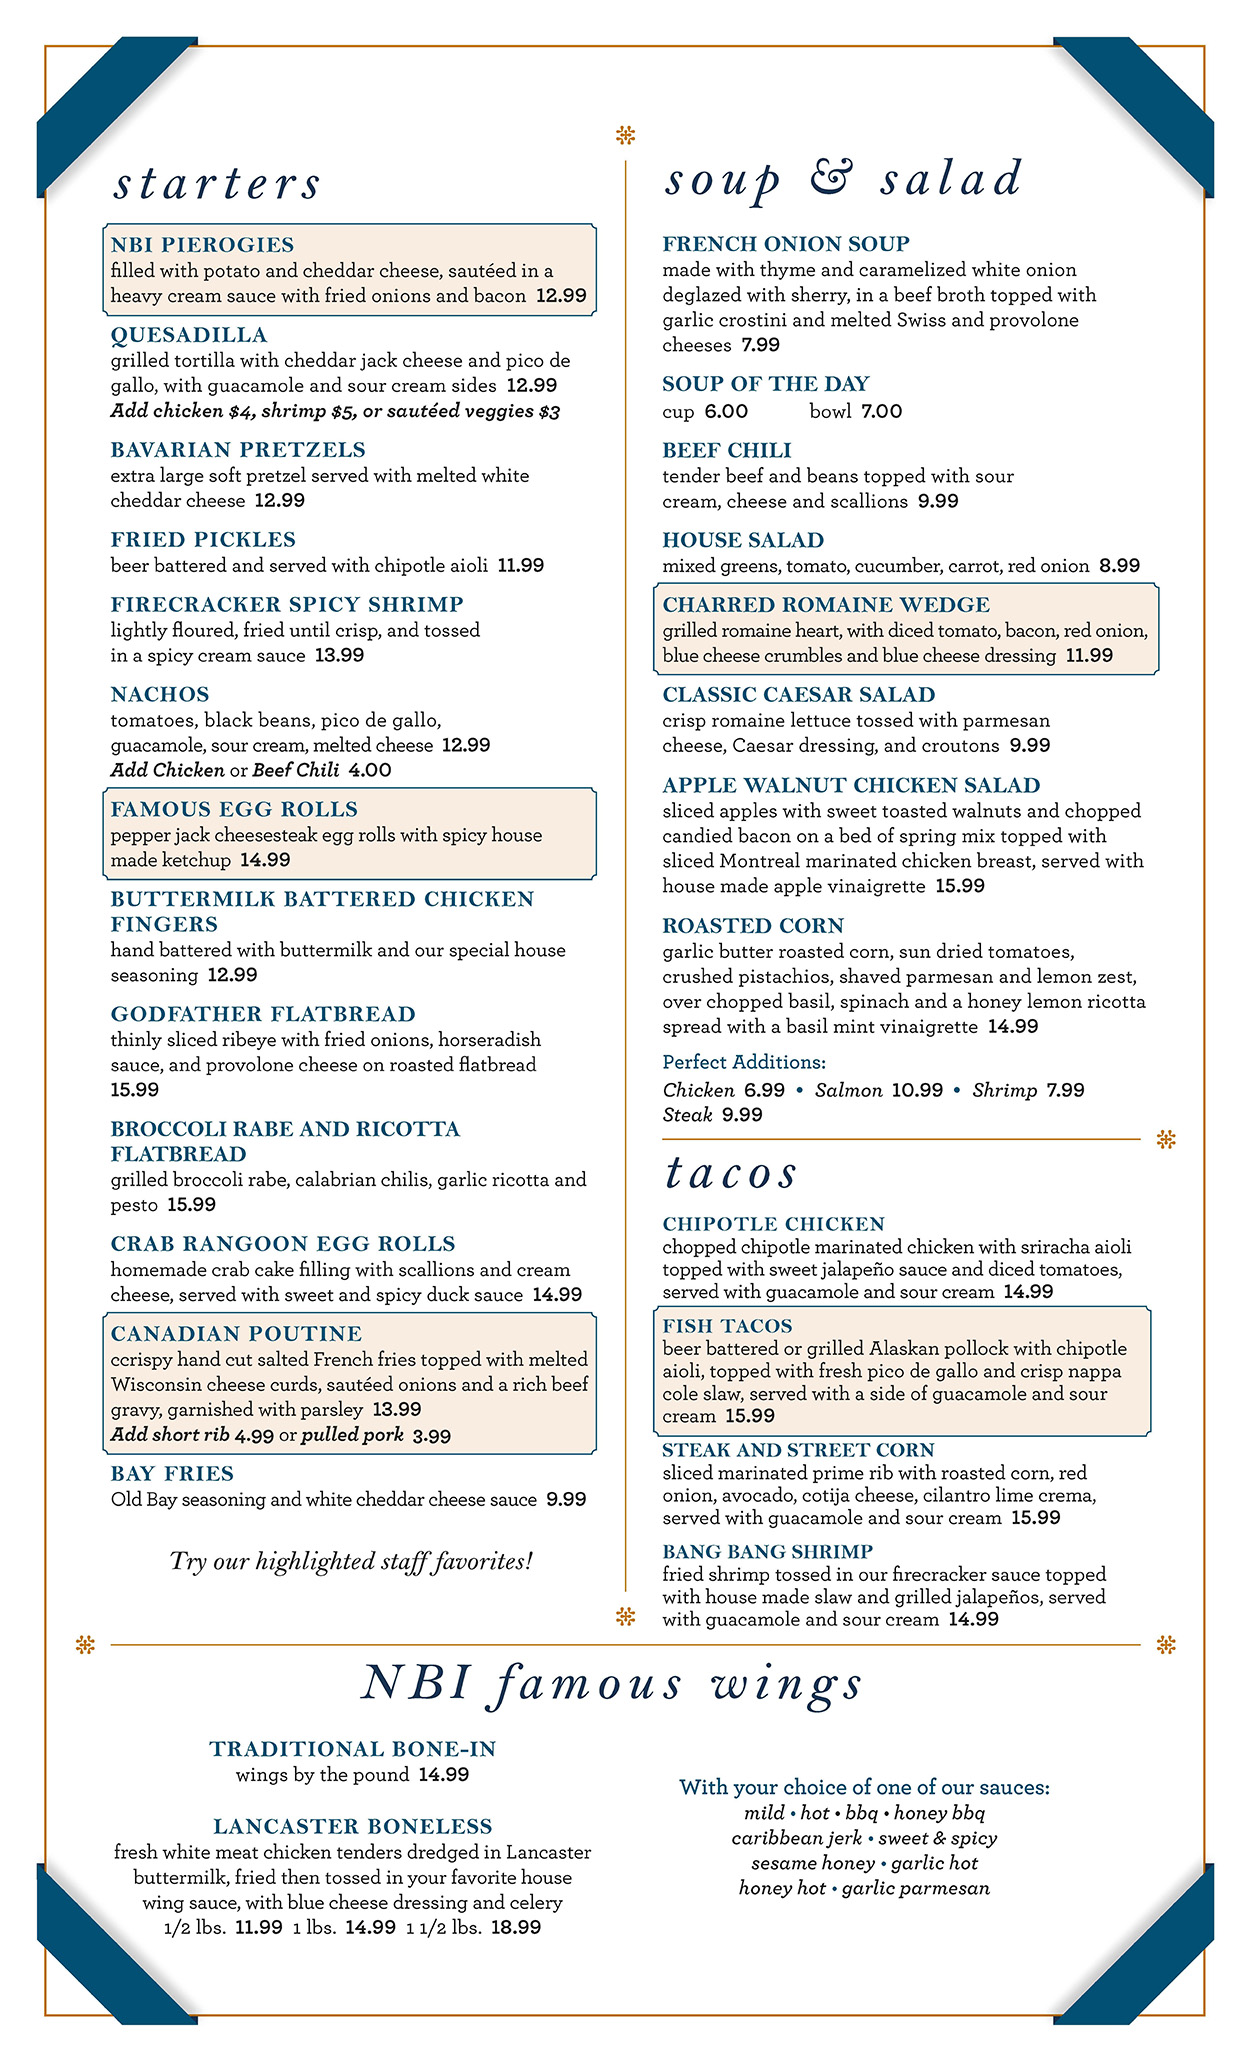 Menu page featuring a list of starters, soups, and salads with descriptions and prices in a formal layout.